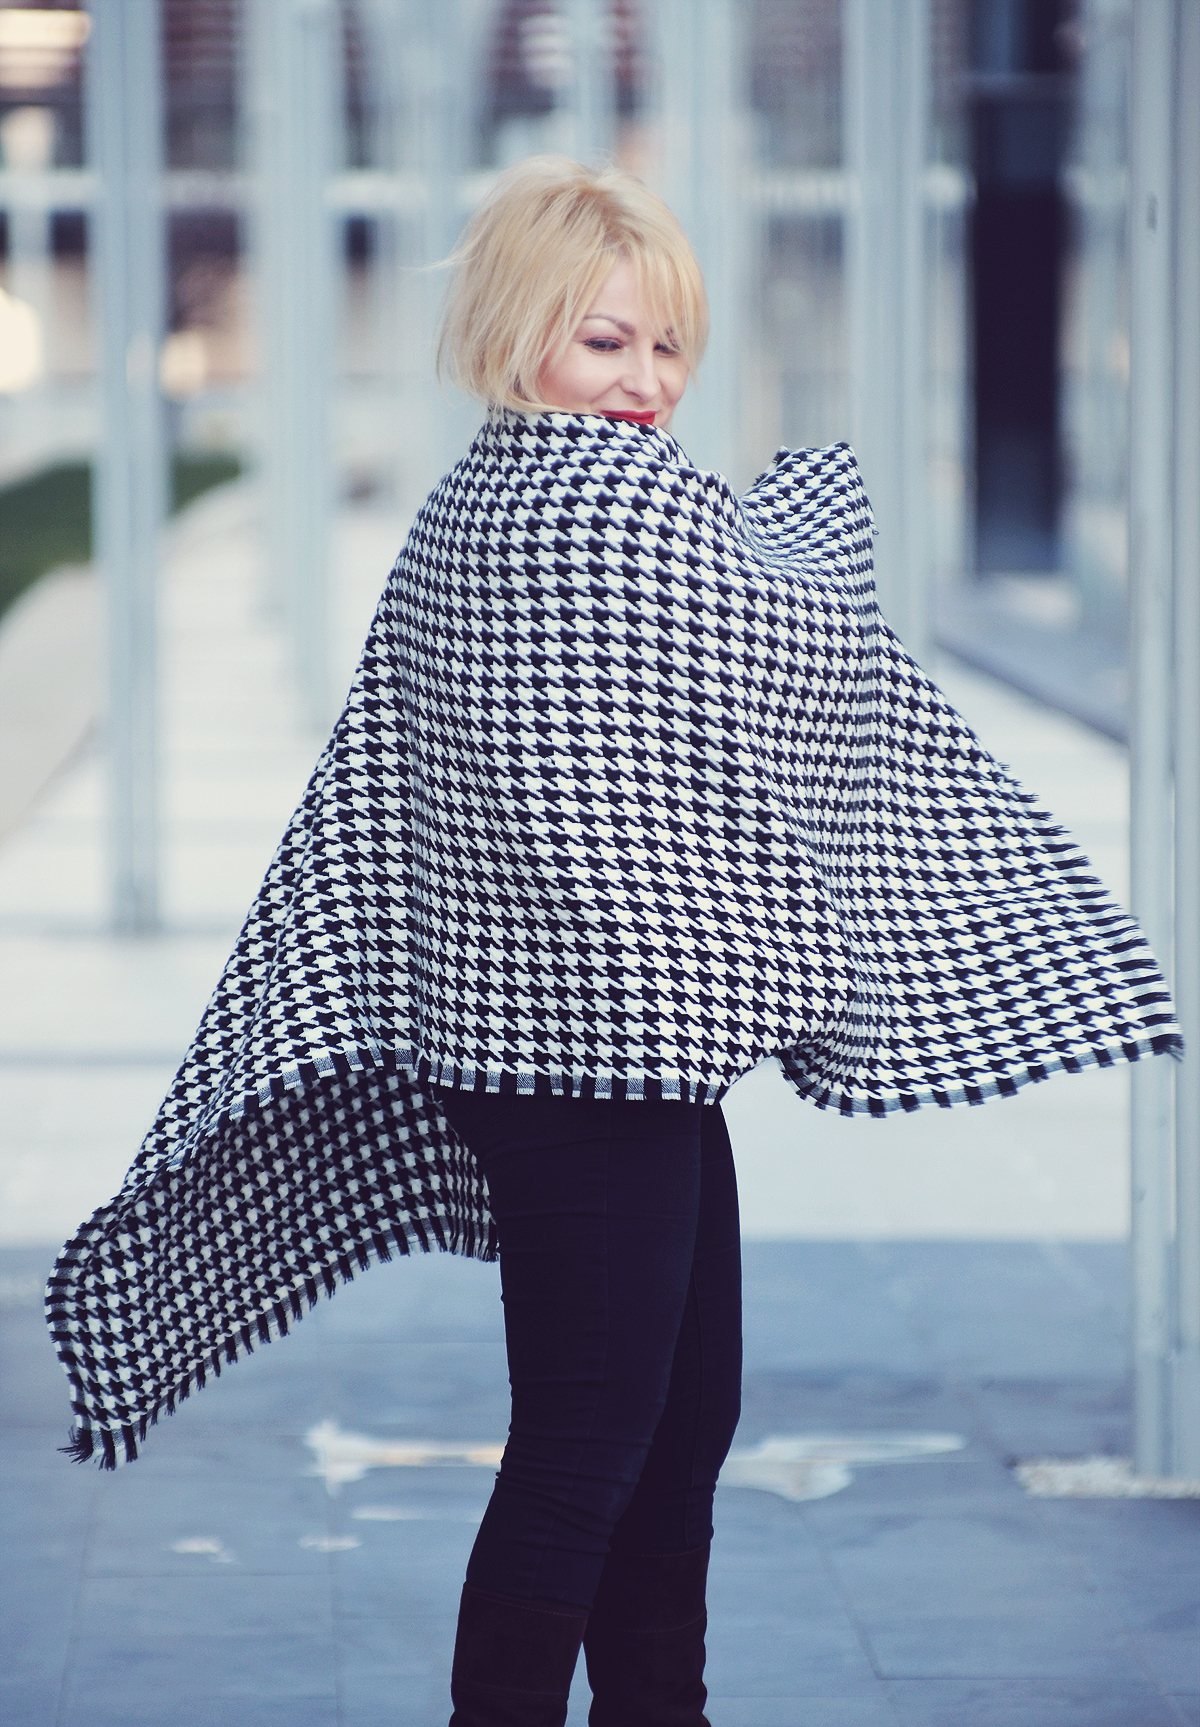 houndstooth pattern scarf, jeans, winter style, winter look